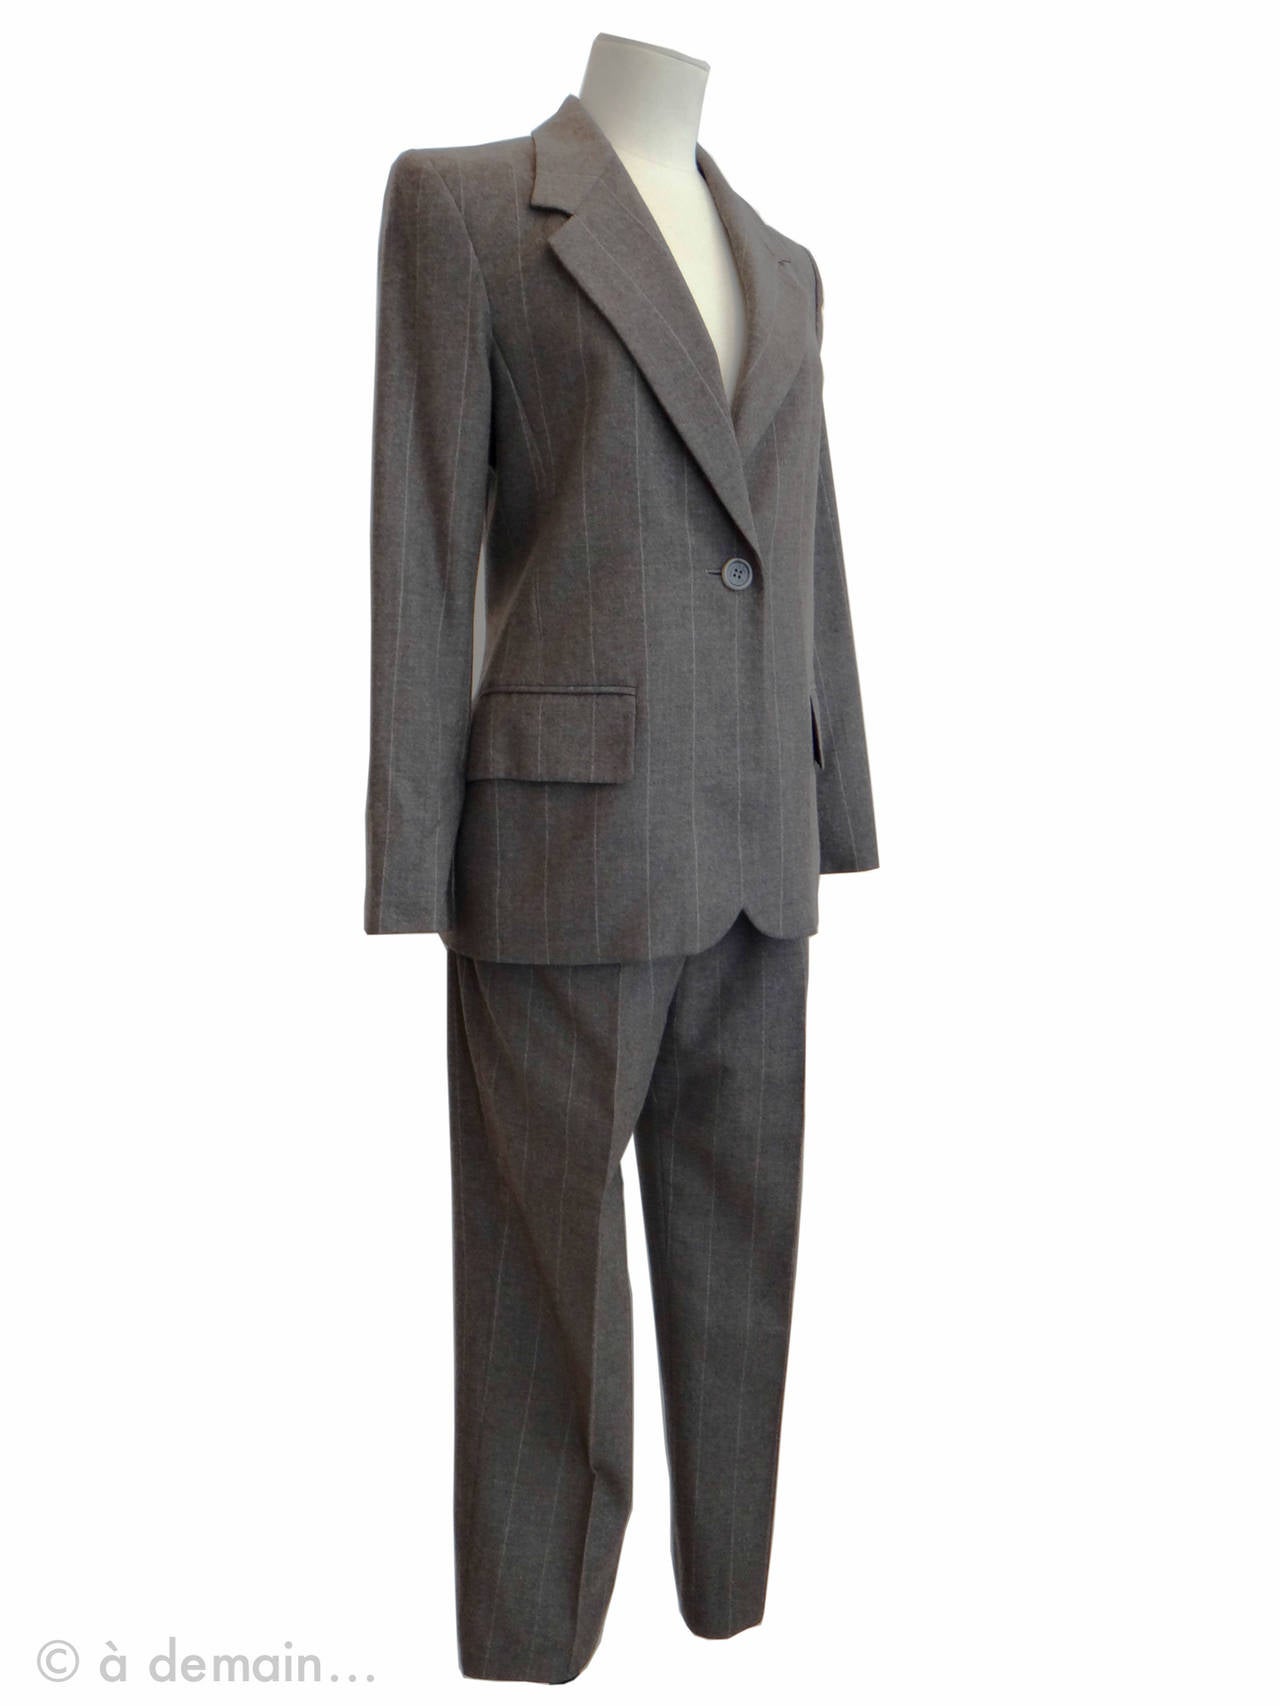 Striped Gray Trouser Suit by Yves Saint Laurent Rive Gauche, made of wool and cashmere, indicated size 36.

Jacket with shoulder pads
Shoulders: 39 cm
Armpits: 40 cm
Bottom: 52 cm
Total height: 70 cm

Trousers
Waist: 33 cm
Total height: